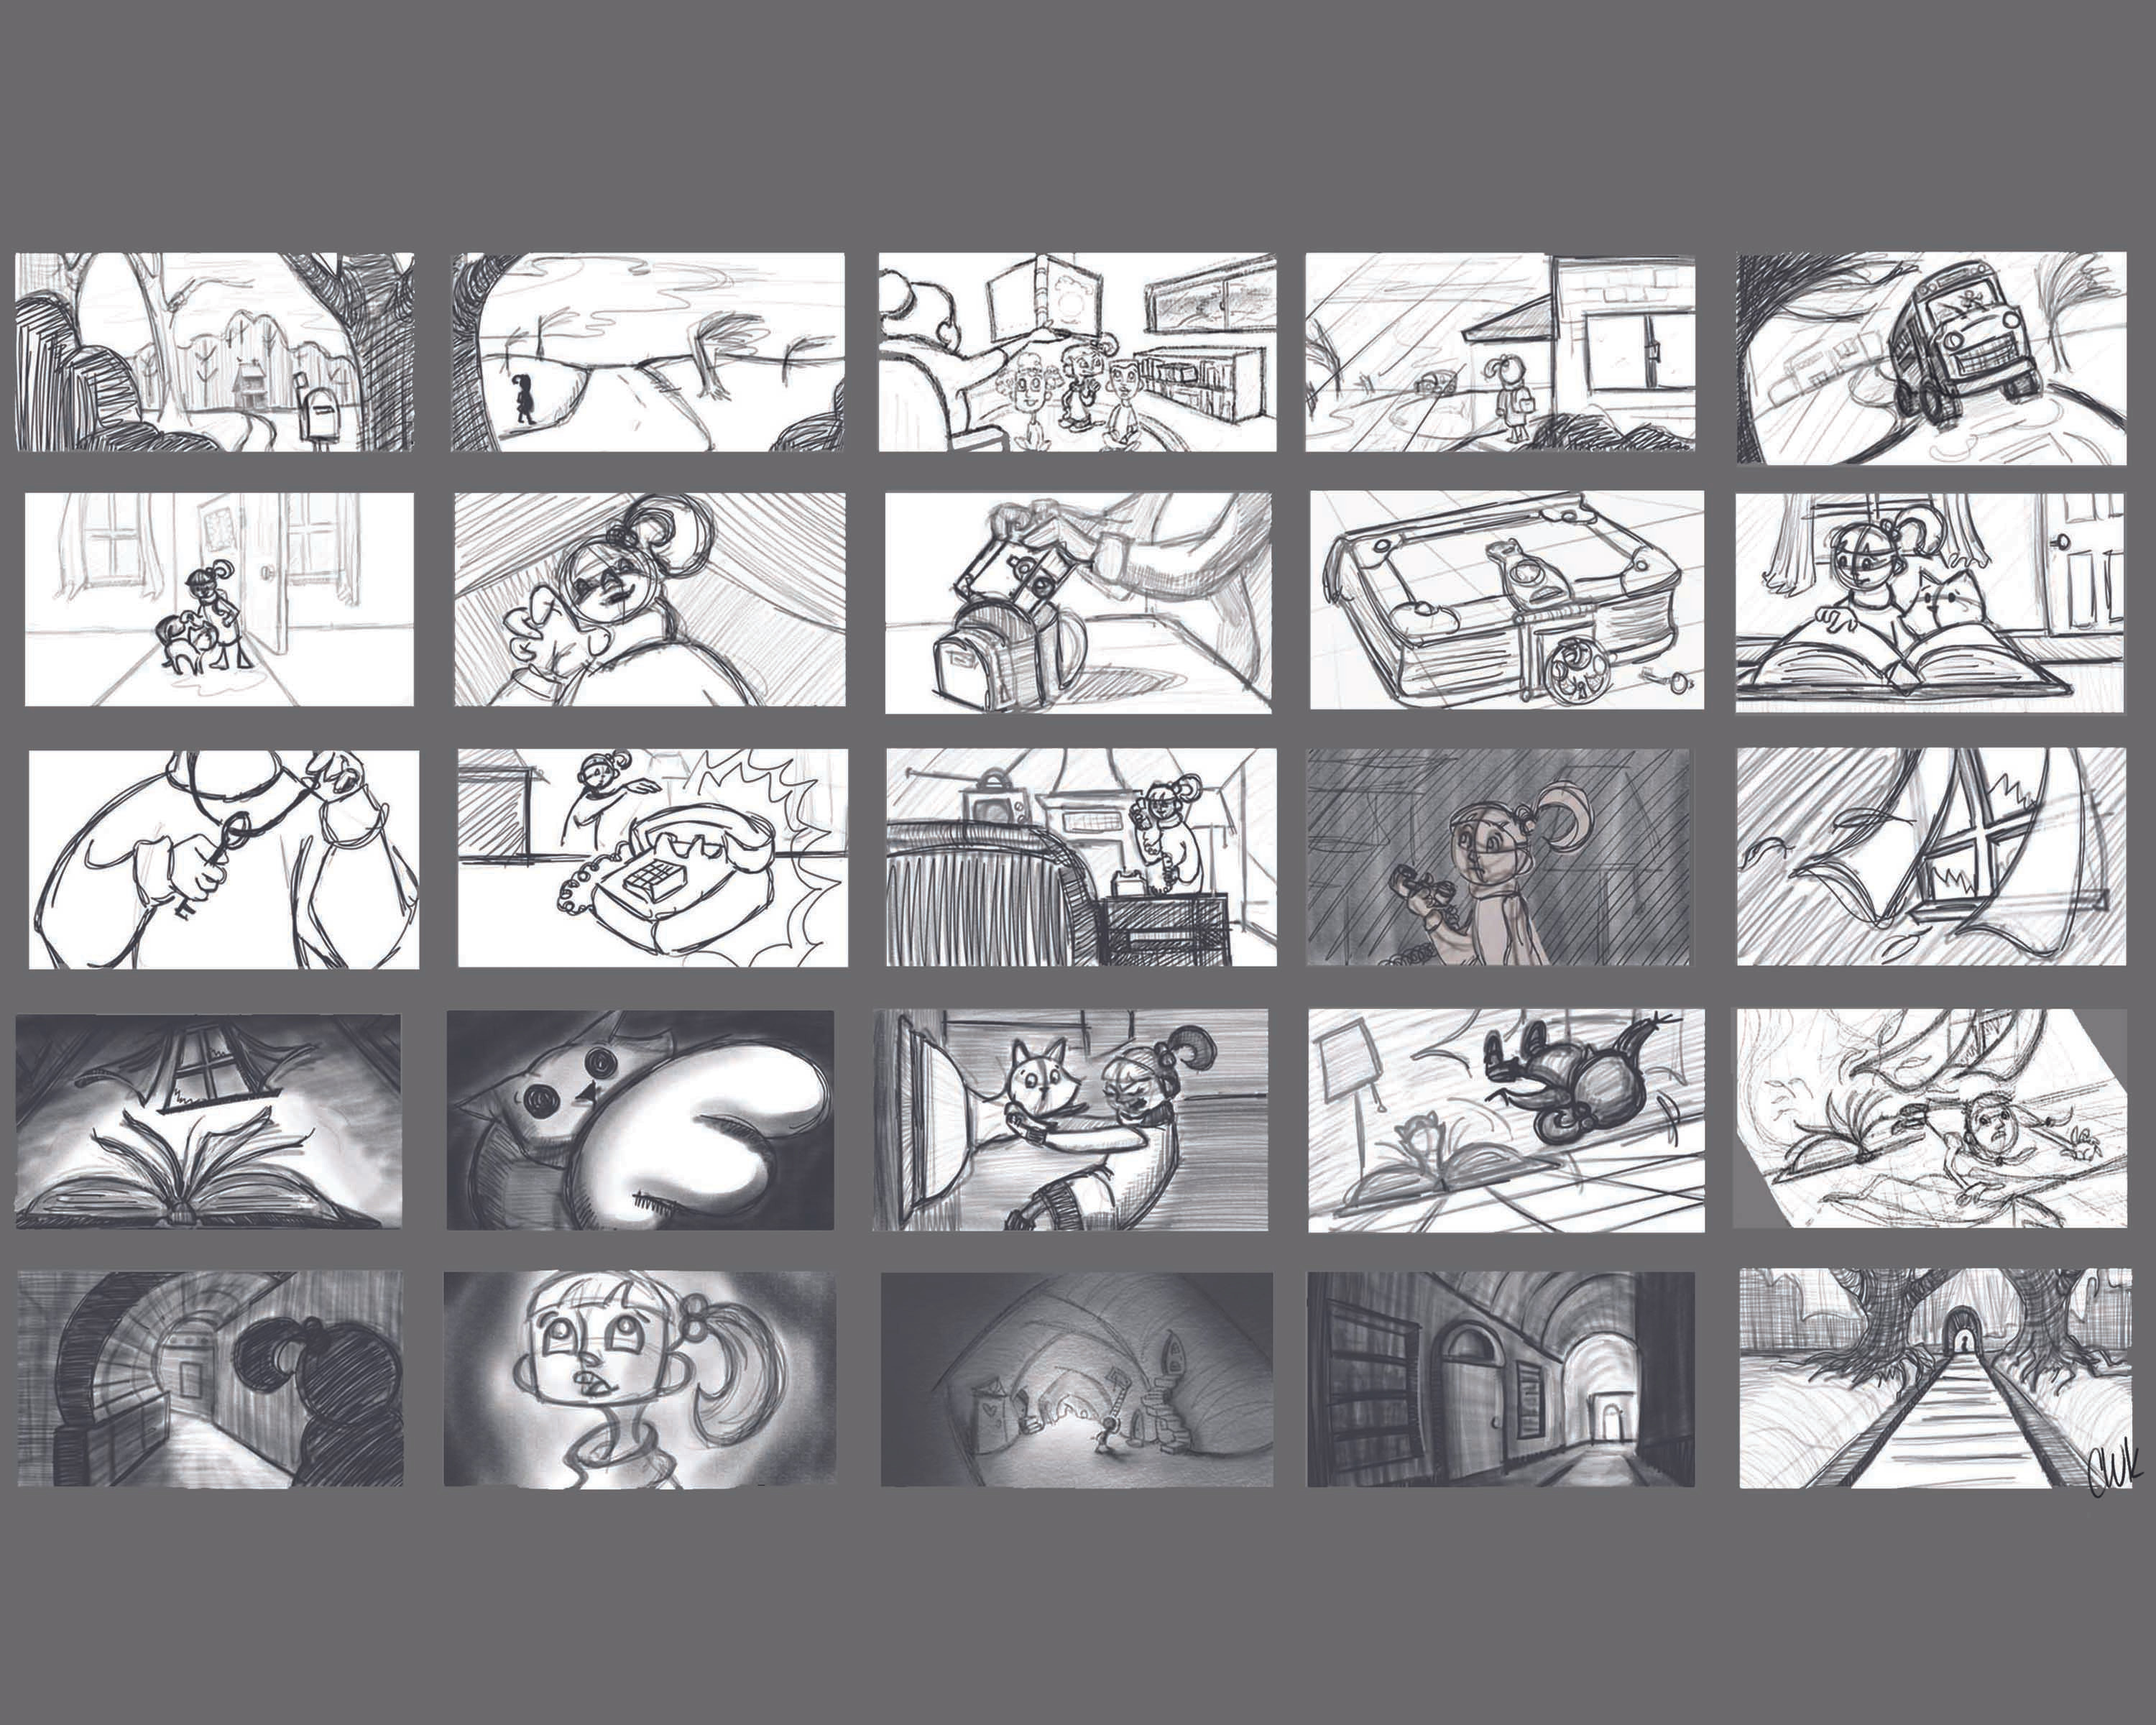 Step 2: Begin the process of testing out a few thumbnails with the full pilot.